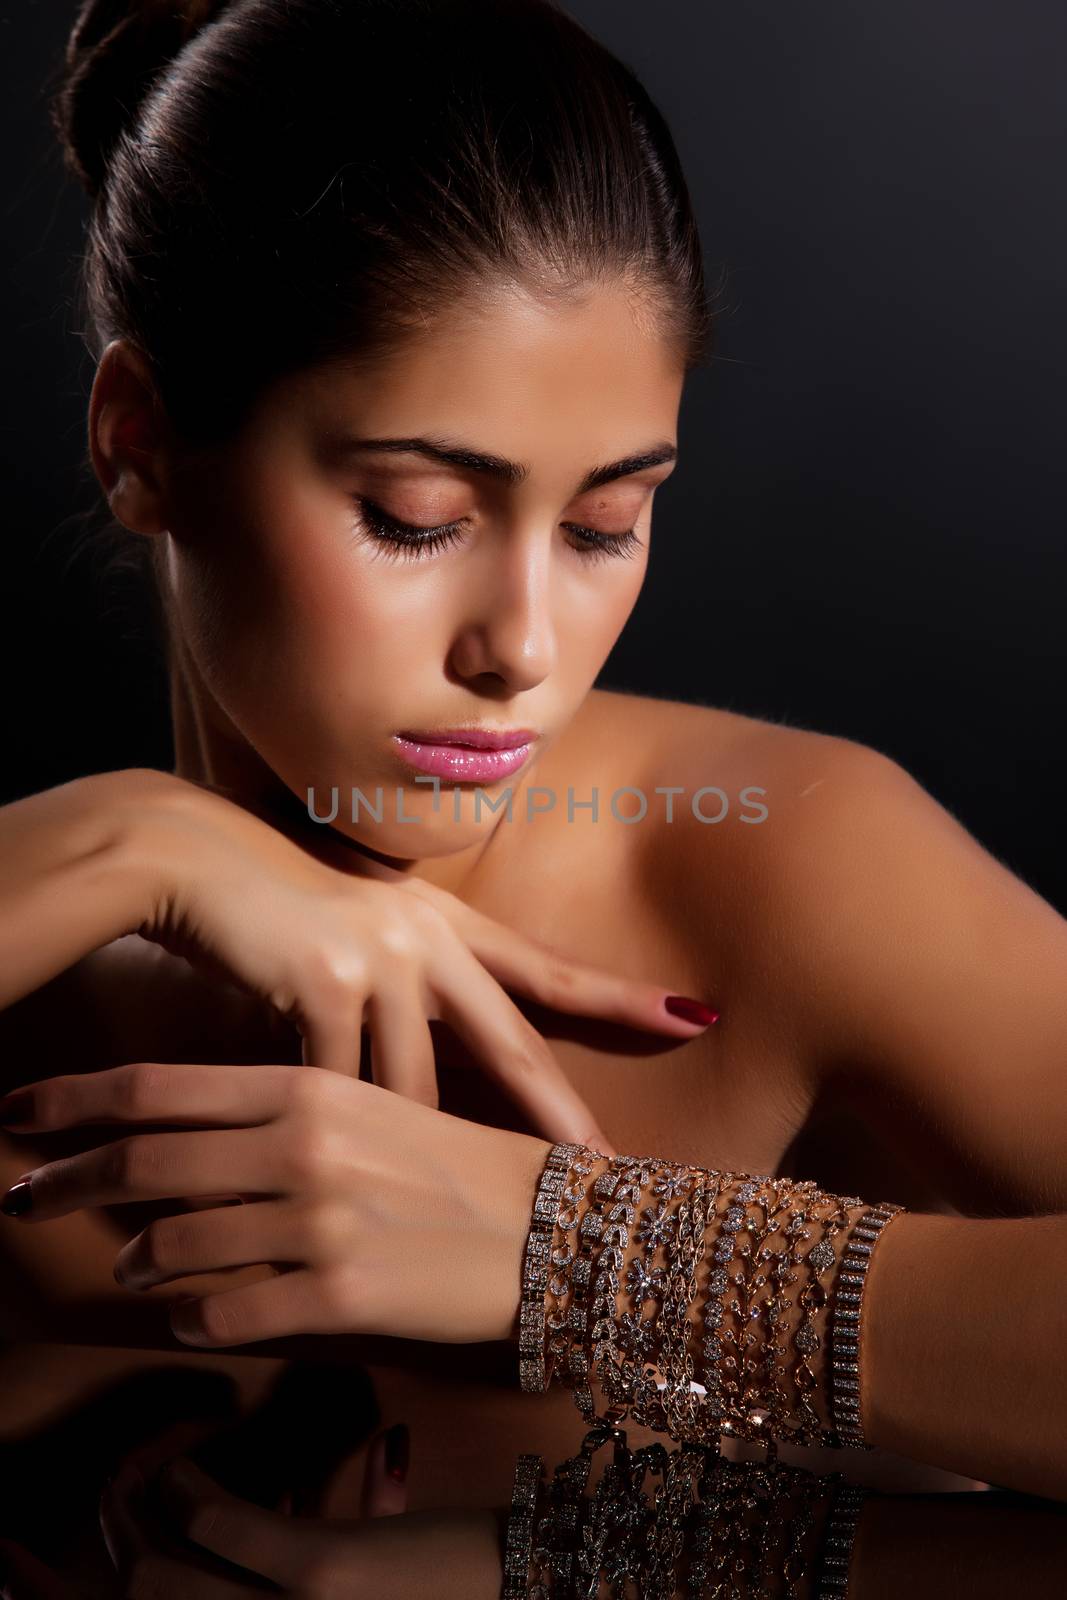 Young Woman With Bracelets by Fotoskat